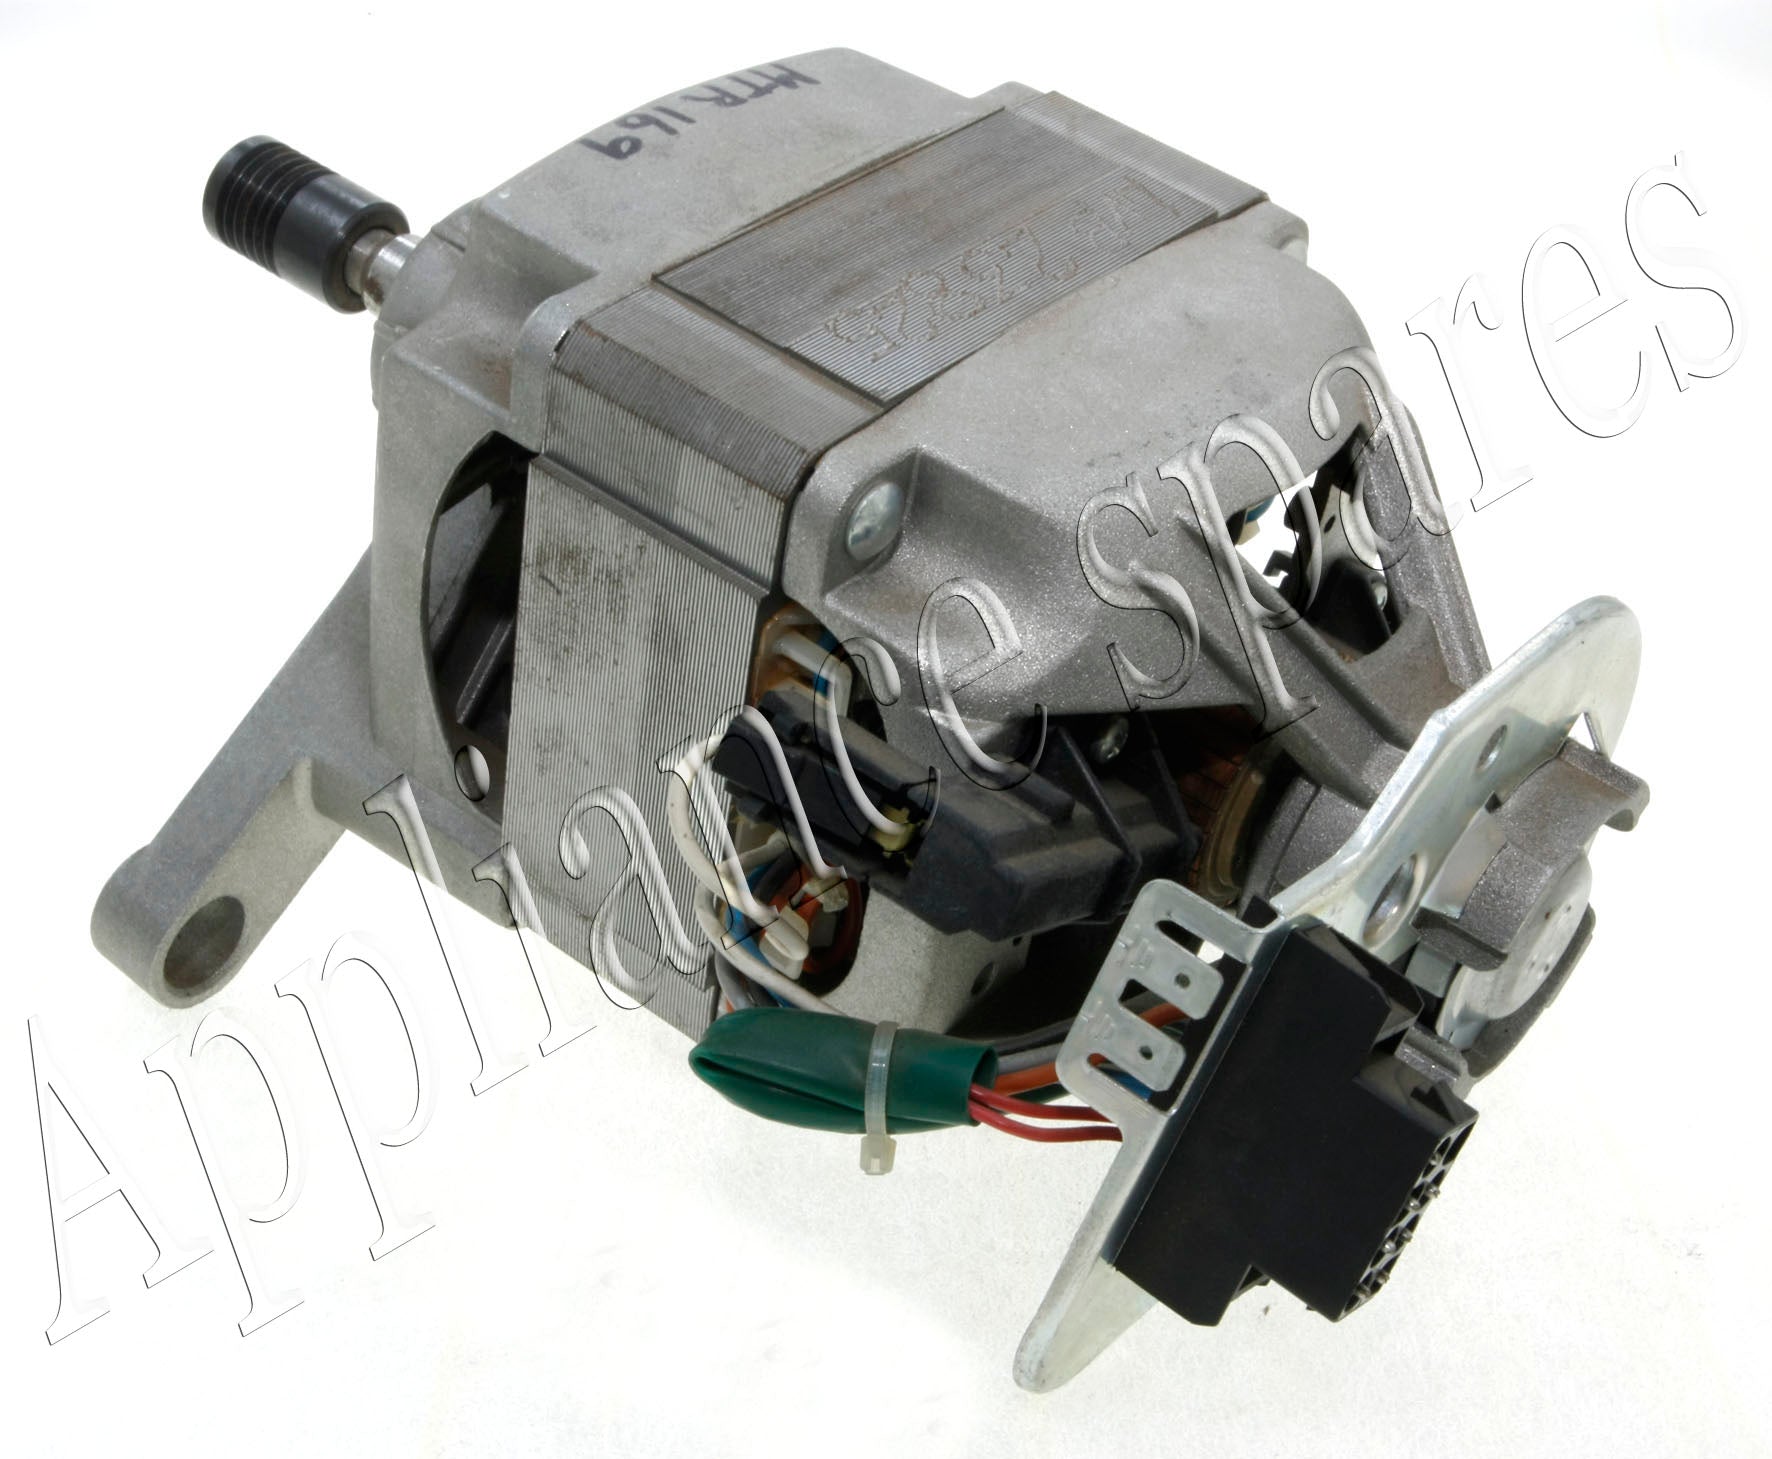 Hoover Washing Machine 7 Pin Connection Motor